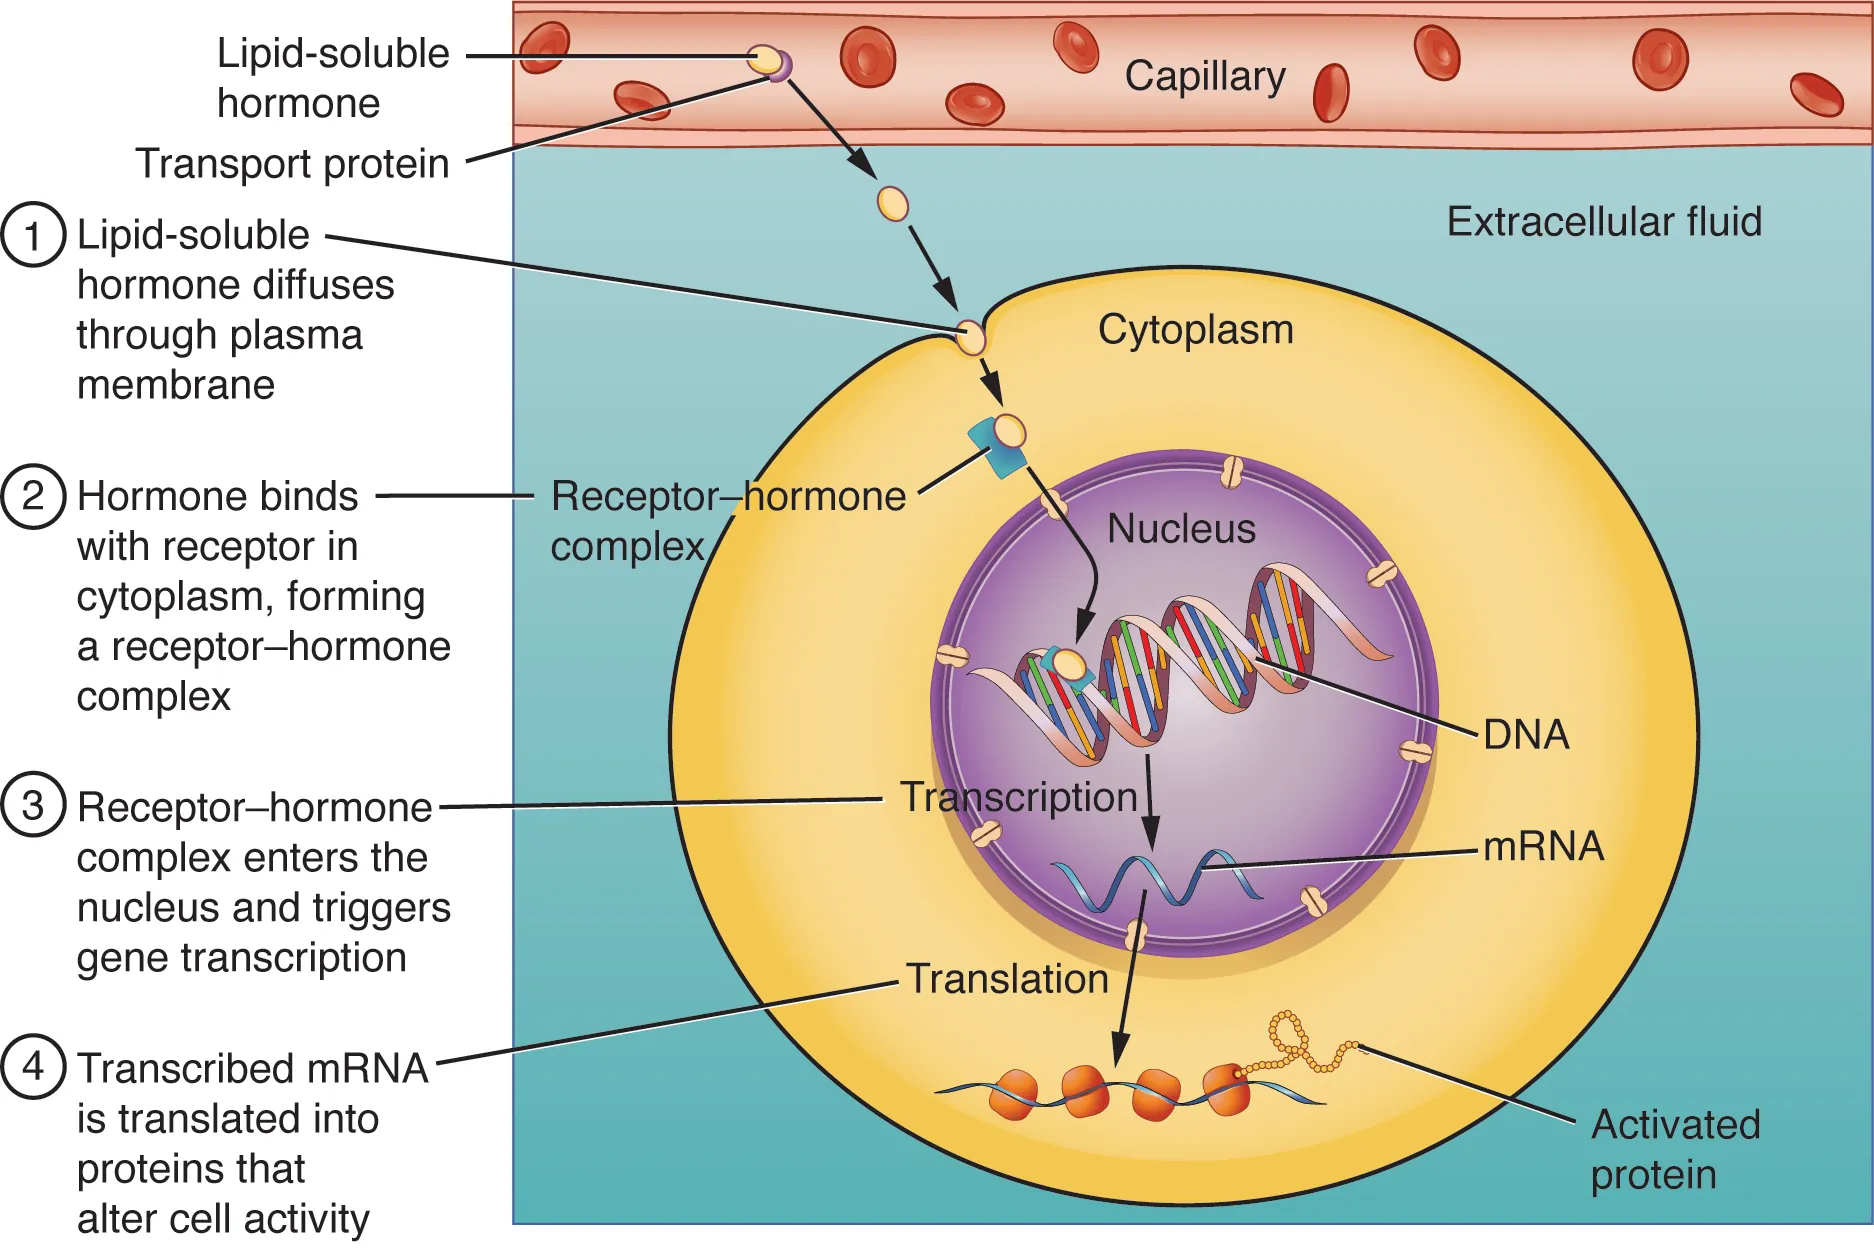 This illustration shows the steps involved with the binding of lipid-soluble hormones. Lipid-soluble hormones, such as steroid hormones, easily diffuse through the cell membrane. The hormone binds to its receptor in the cytosol, forming a receptor-hormone complex. The receptor-hormone complex then enters the nucleus and binds to the target gene on the cell’s DNA. Transcription of the gene creates a messenger RNA that is translated into the desired protein within the cytoplasm. It is these proteins that alter the cell’s activity.